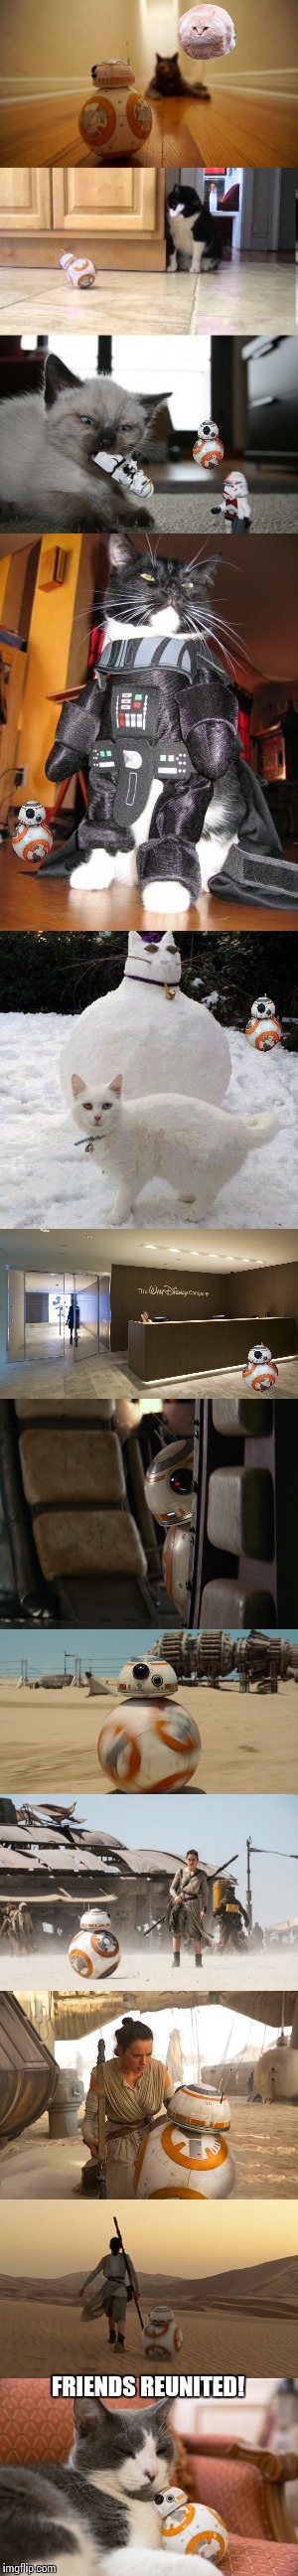 BB-8 searches for his friend... and meets a new friend along the way! | FRIENDS REUNITED! | image tagged in memes,star wars | made w/ Imgflip meme maker